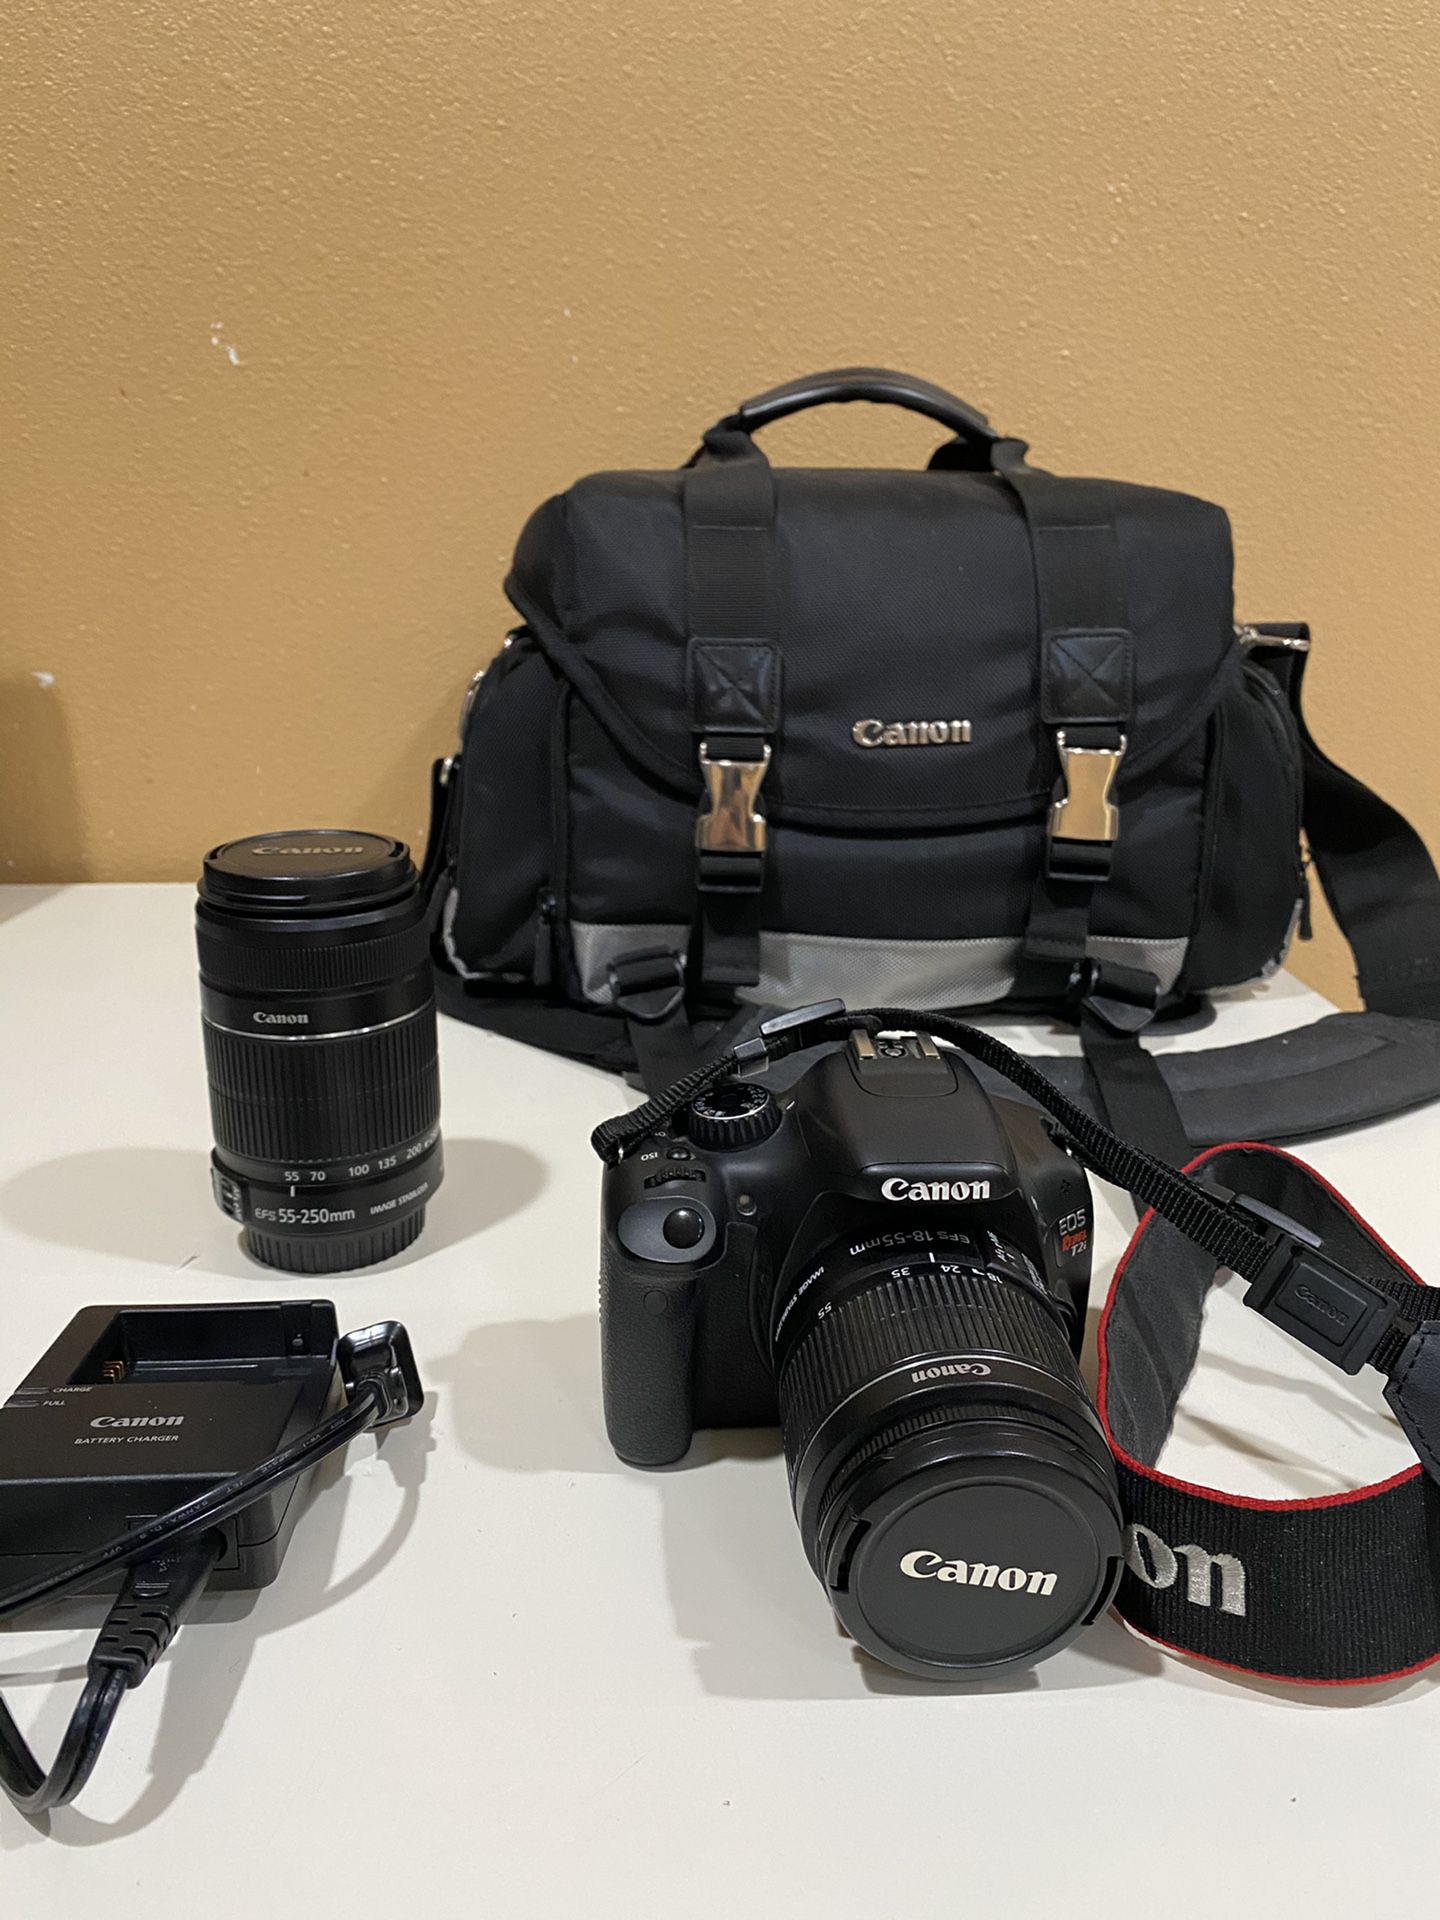 Canon T2i with an 18-55mm and 55-250mm